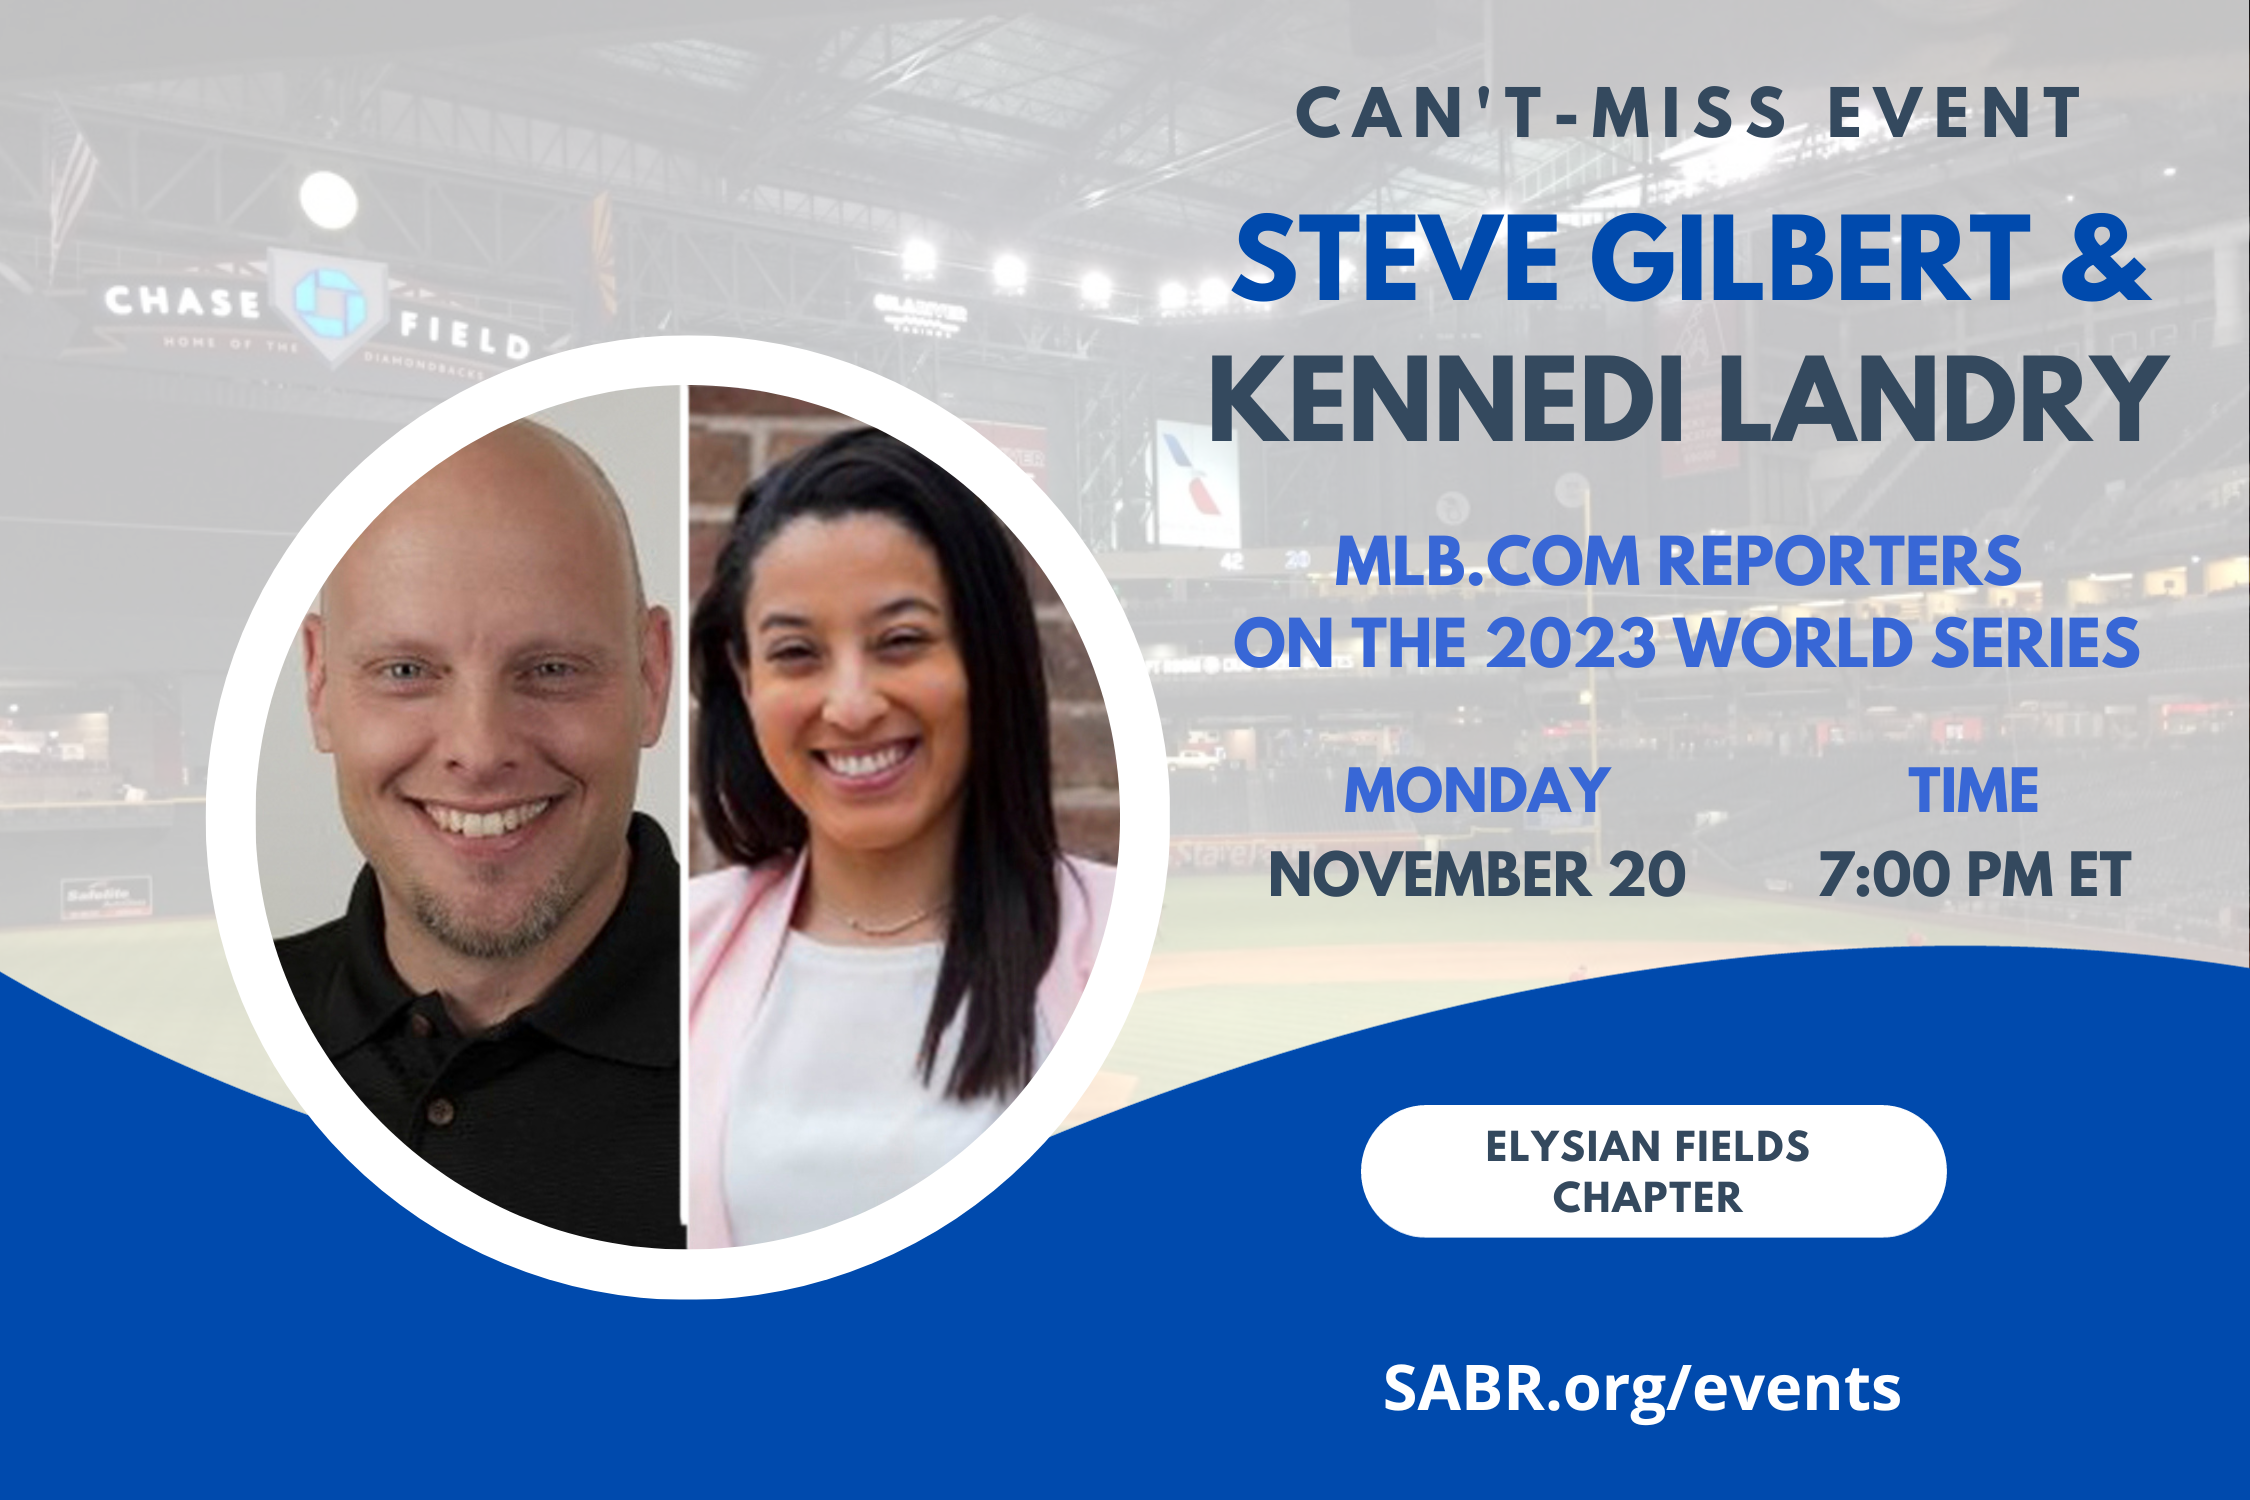 SABR’s Elysian Fields Chapter in Northern New Jersey will have its next Zoom chapter meeting on Monday, November 20 at 7:00-8:30 p.m. ET.

Our guest speakers will be: MLB.com beat reporters Kennedi Landry (Texas Rangers) and Steve Gilbert (Arizona Diamondbacks) on covering the 2023 World Series. We'll also hear from Zak Ford, author of "Called Up: Ballplayers Remember Becoming Major Leaguers."